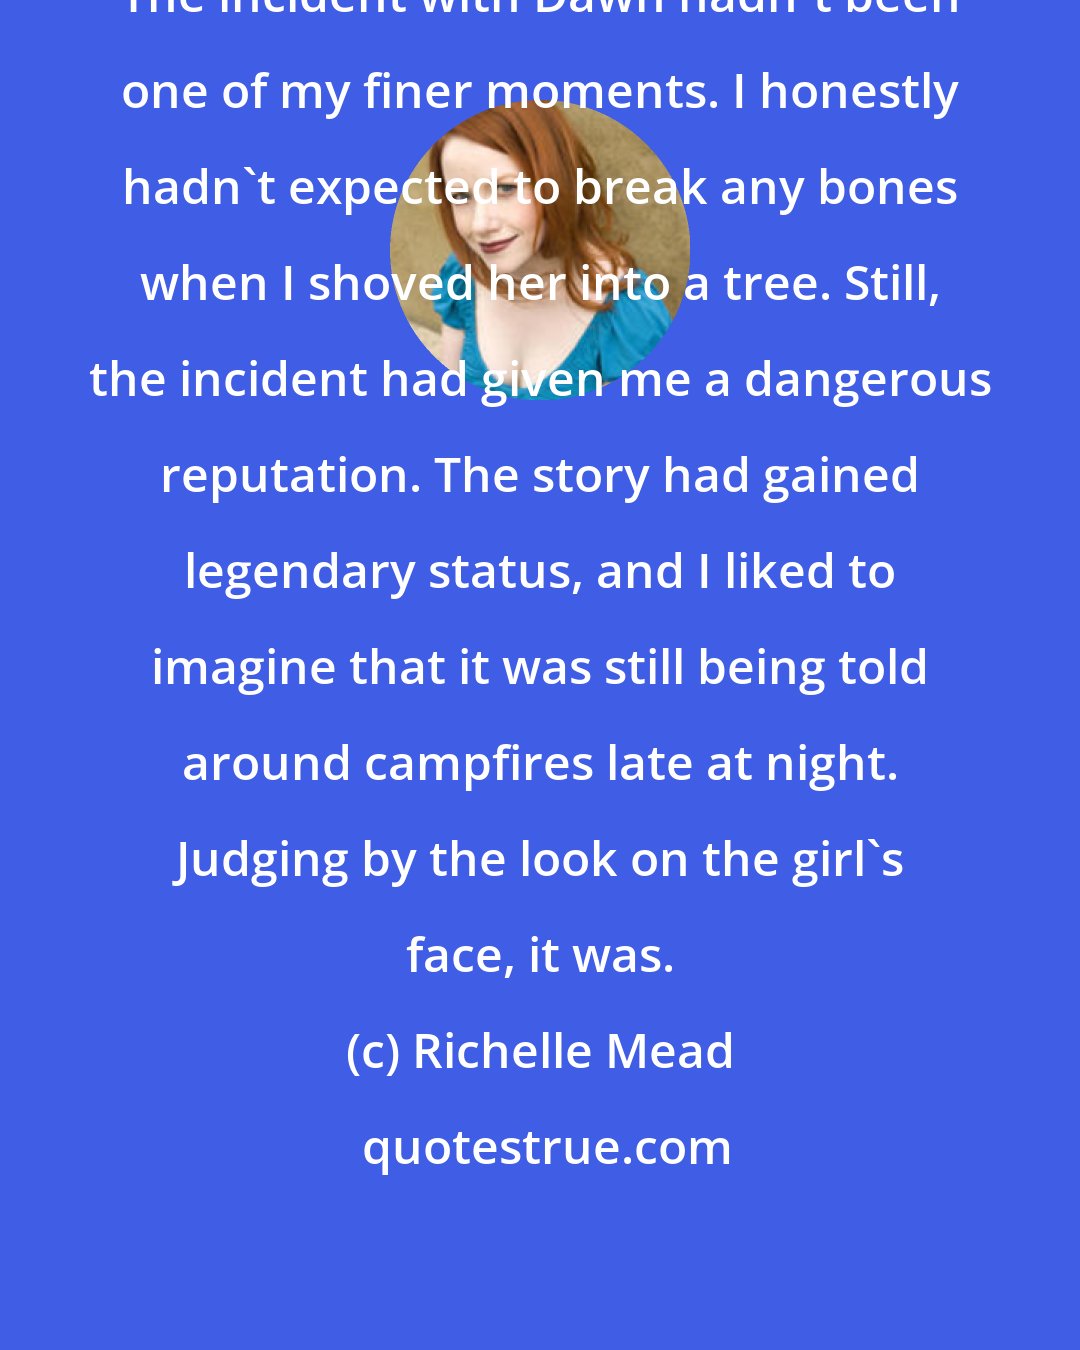 Richelle Mead: The incident with Dawn hadn't been one of my finer moments. I honestly hadn't expected to break any bones when I shoved her into a tree. Still, the incident had given me a dangerous reputation. The story had gained legendary status, and I liked to imagine that it was still being told around campfires late at night. Judging by the look on the girl's face, it was.